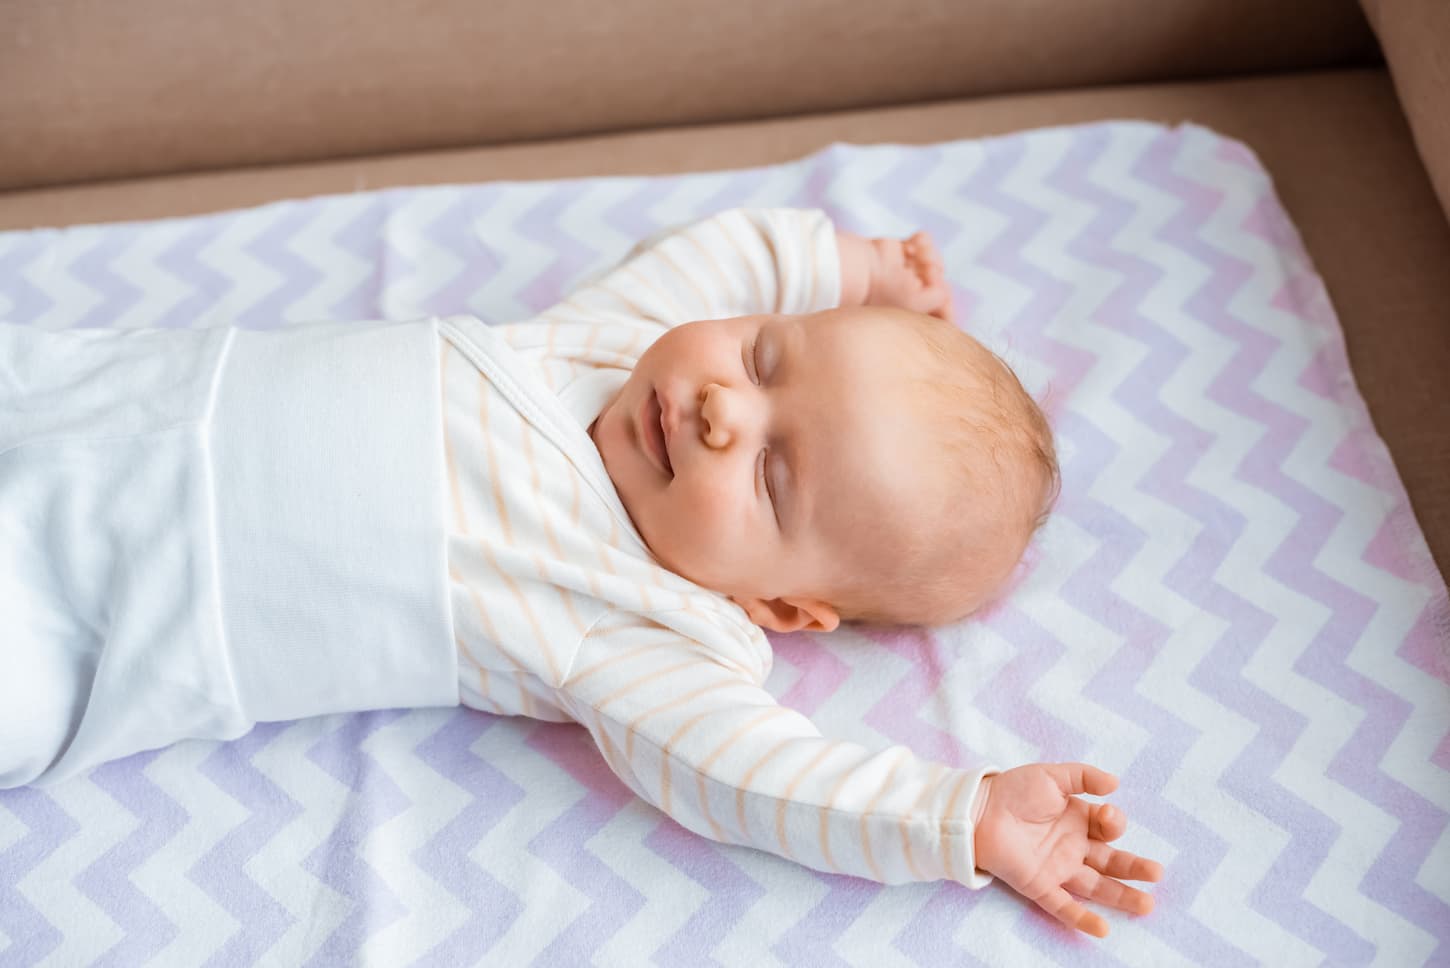 An image of an adorable newborn baby with closed eyes and raised hands during a nap.